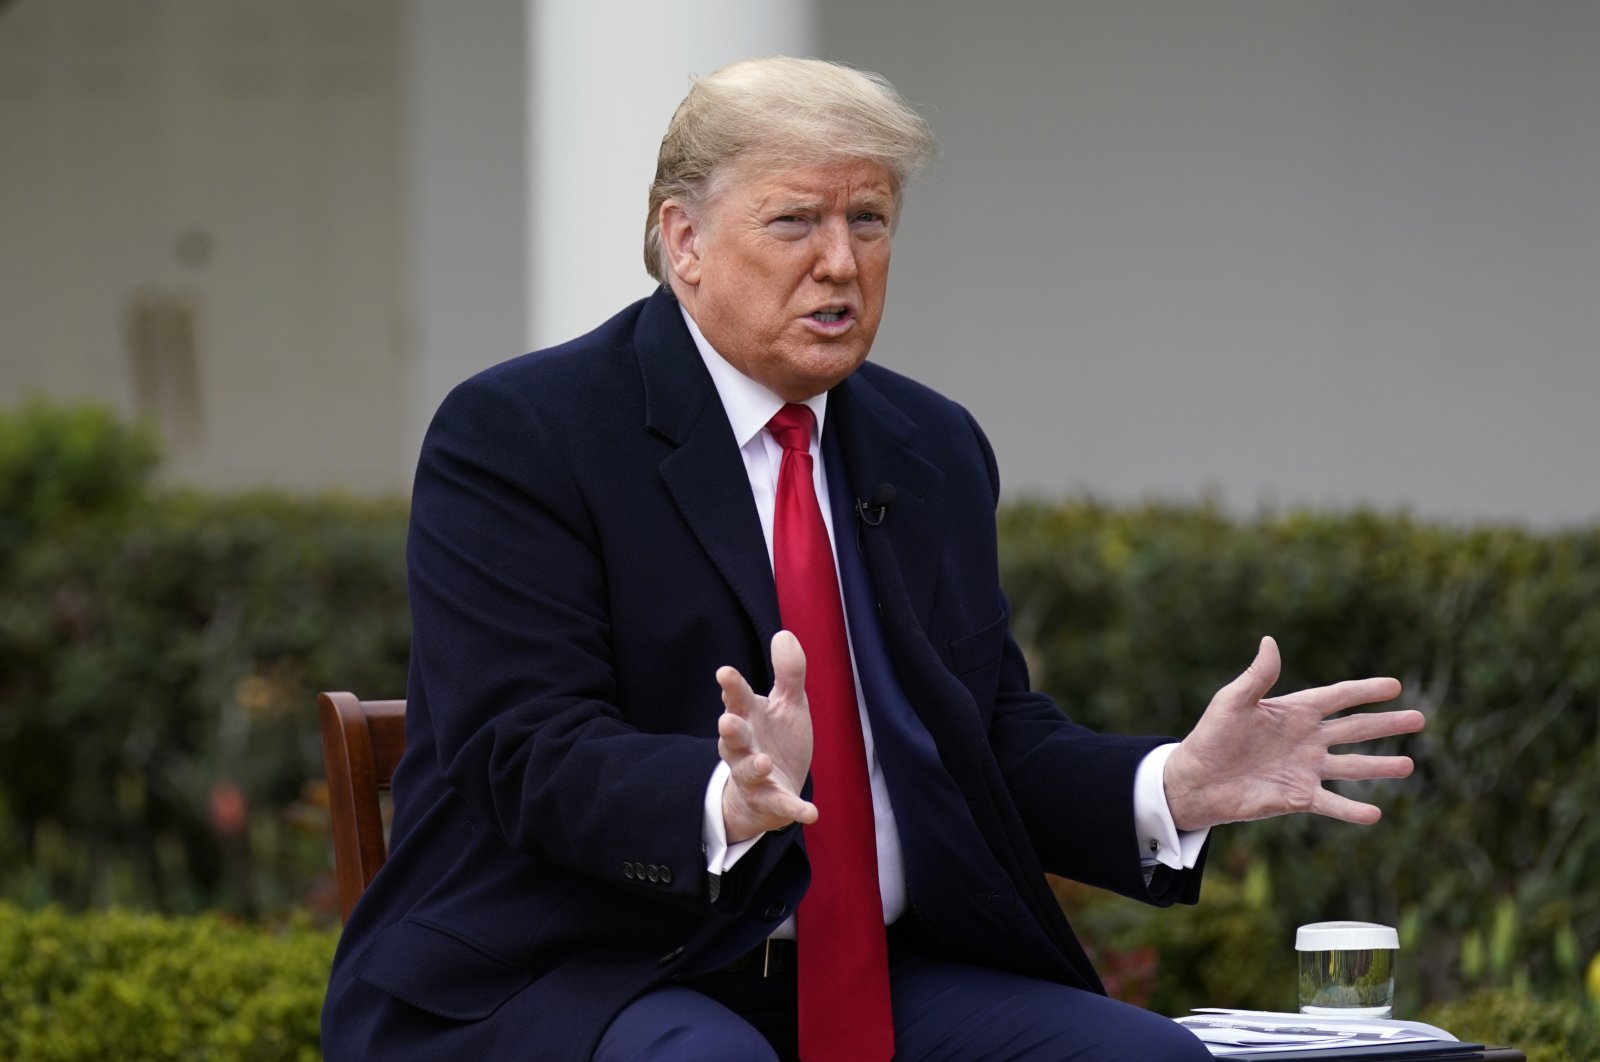 President Donald Trump speaks with Fox News Channel Anchor Bill Hemmer during a Fox News Channel virtual town hall, at the White House, Tuesday, March 24, 2020, in Washington. (AP Photo)